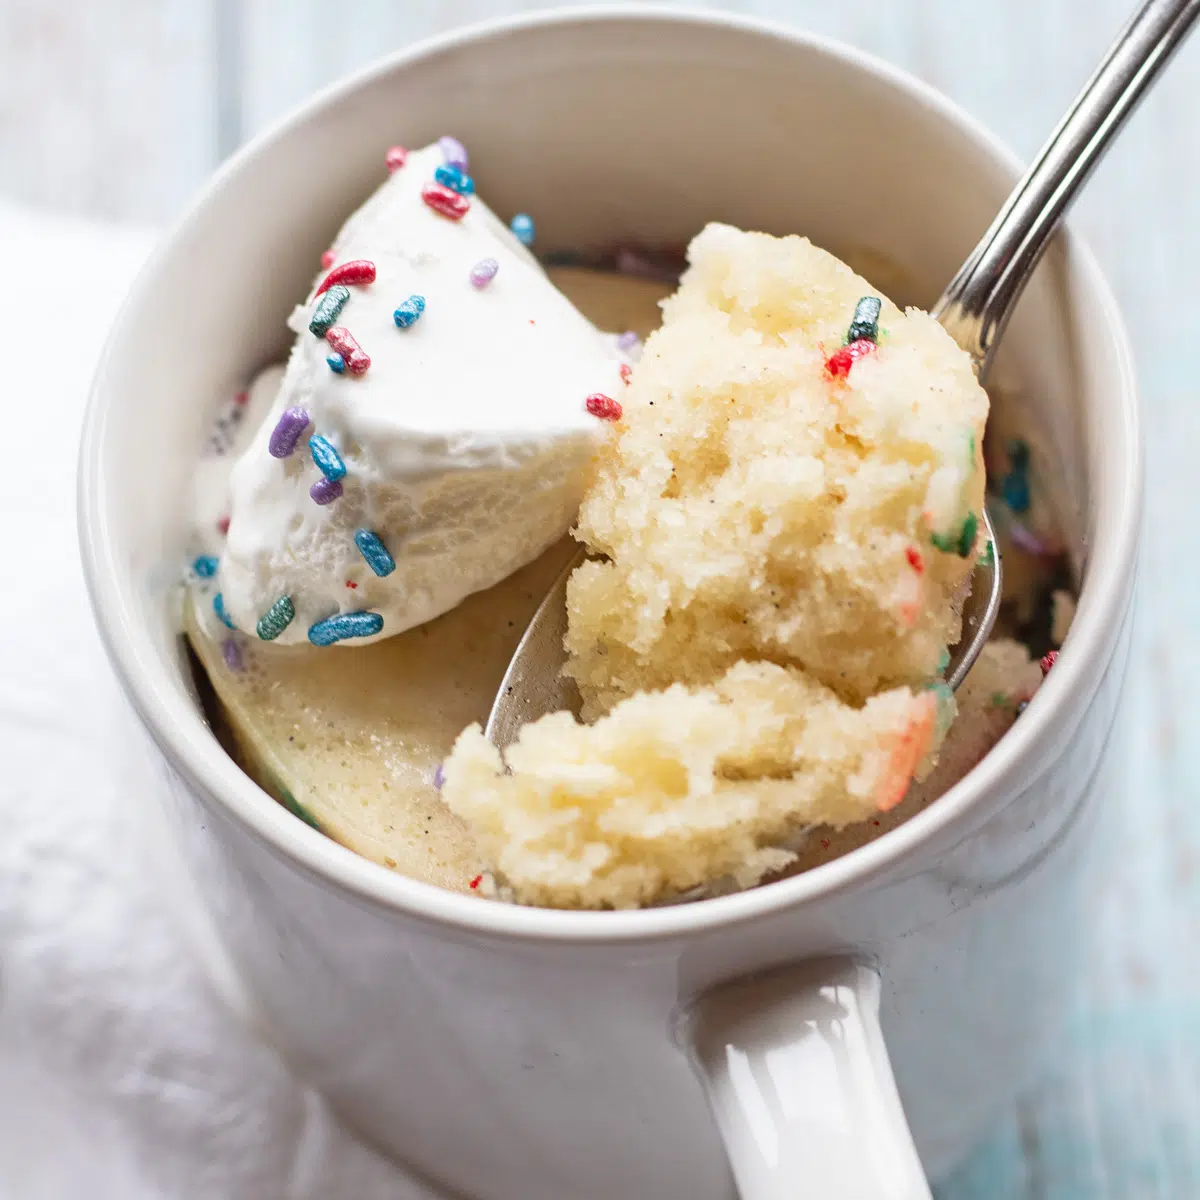 Vanilla mug cake baked and topped with whipped cream and sprinkles.